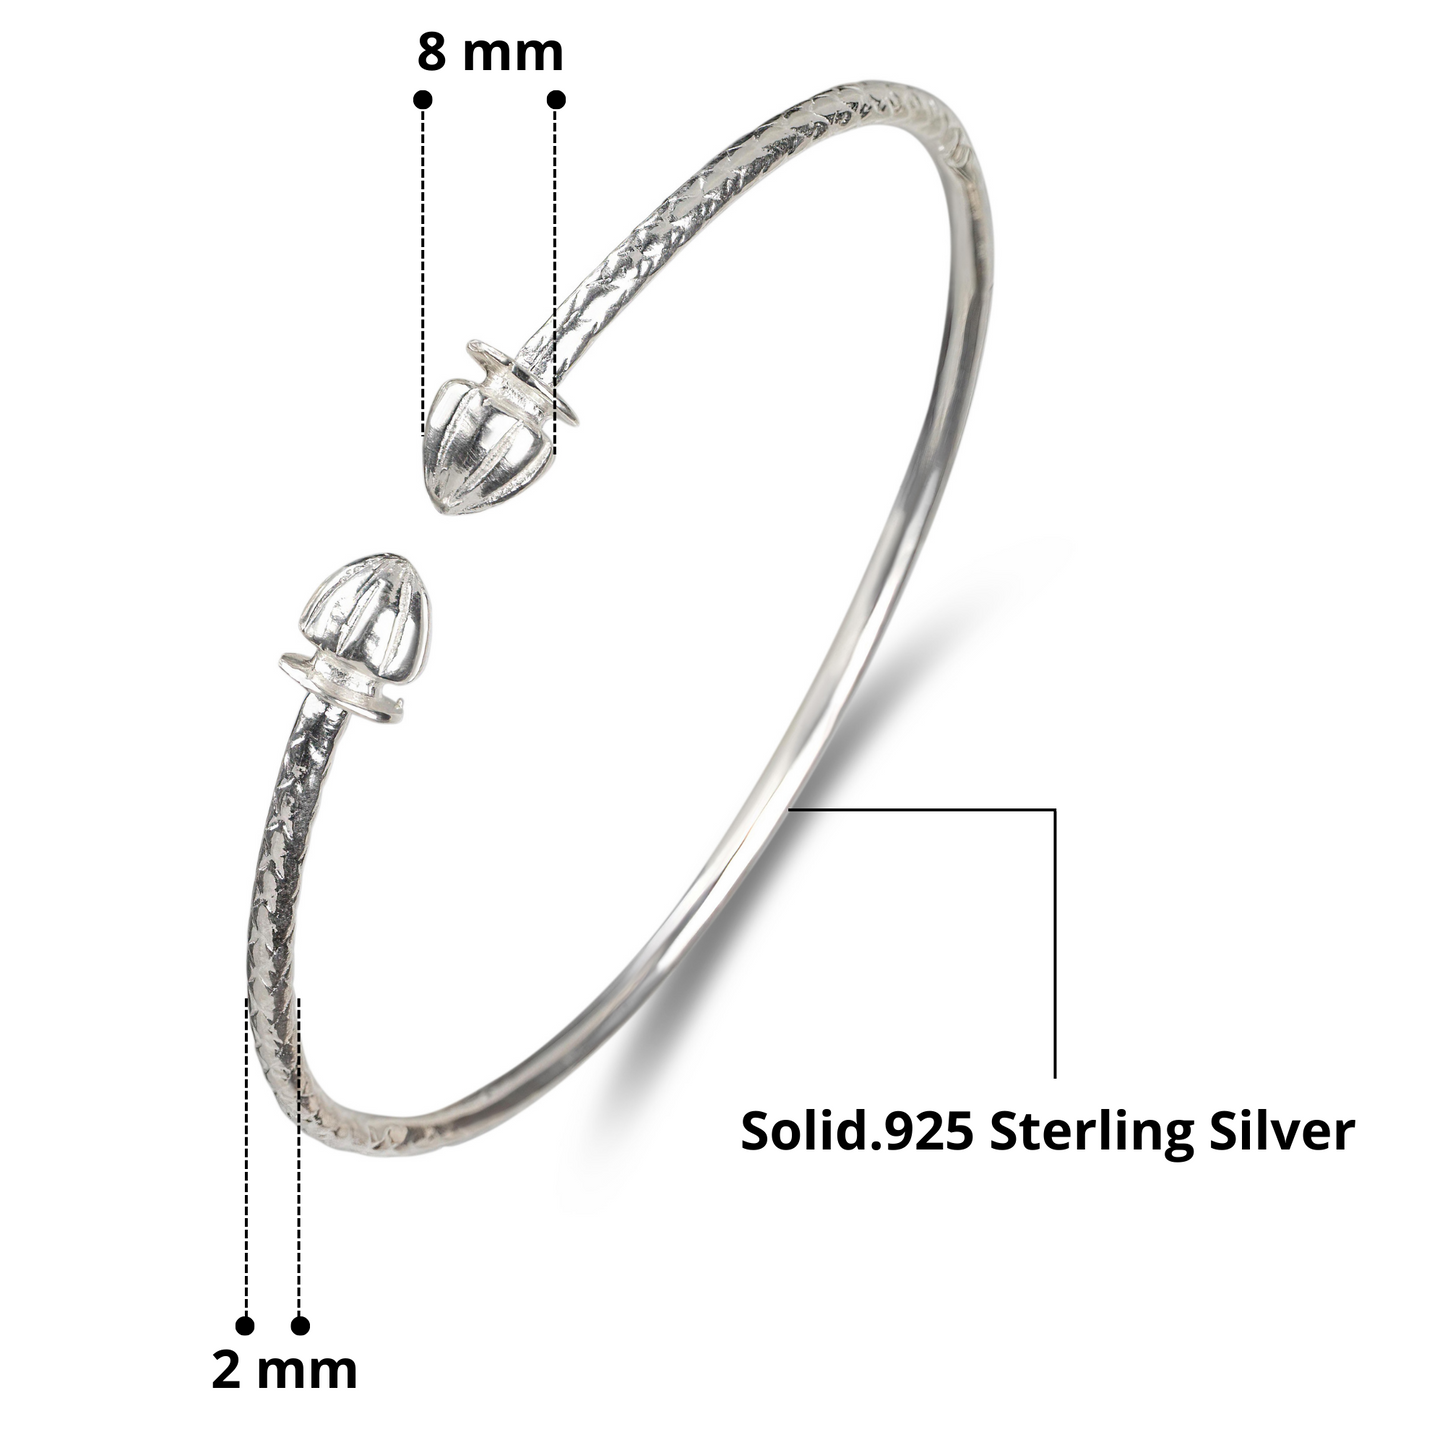 Better Jewelry Acorn .925 Sterling Silver West Indian Bangle (1 piece)